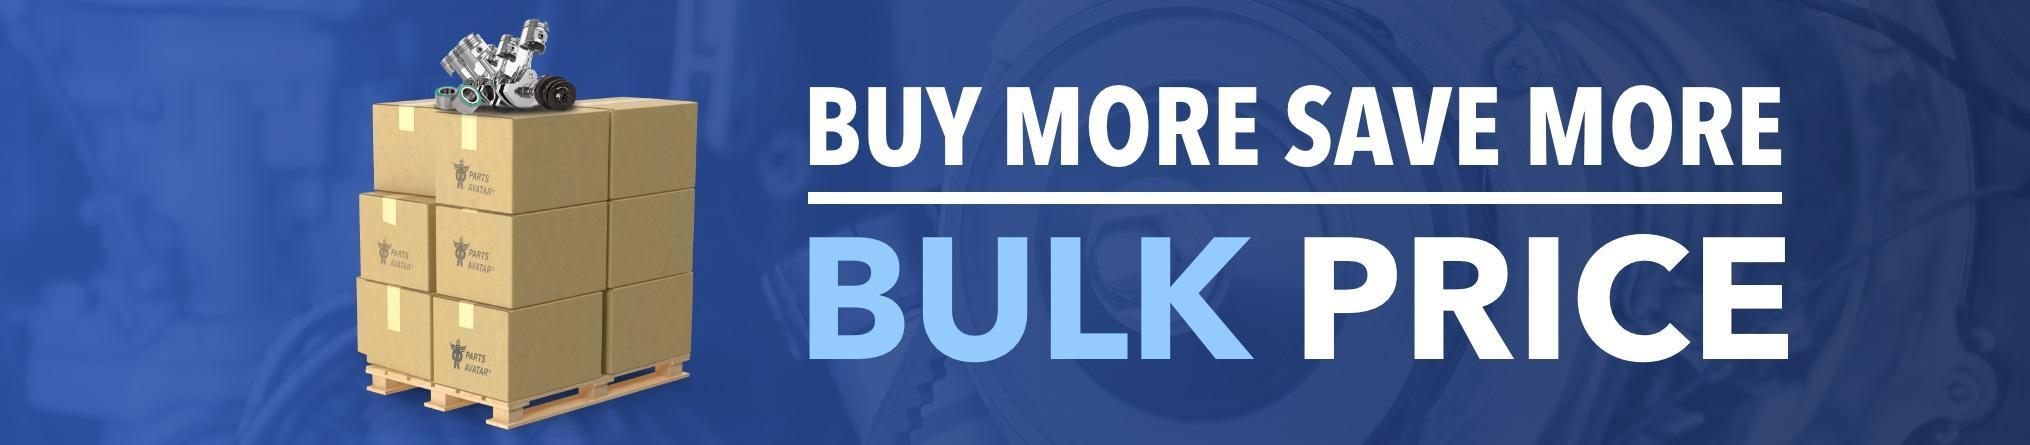 Discover Discounts On Bulk Purchase For Shops & Garage For Your Vehicle